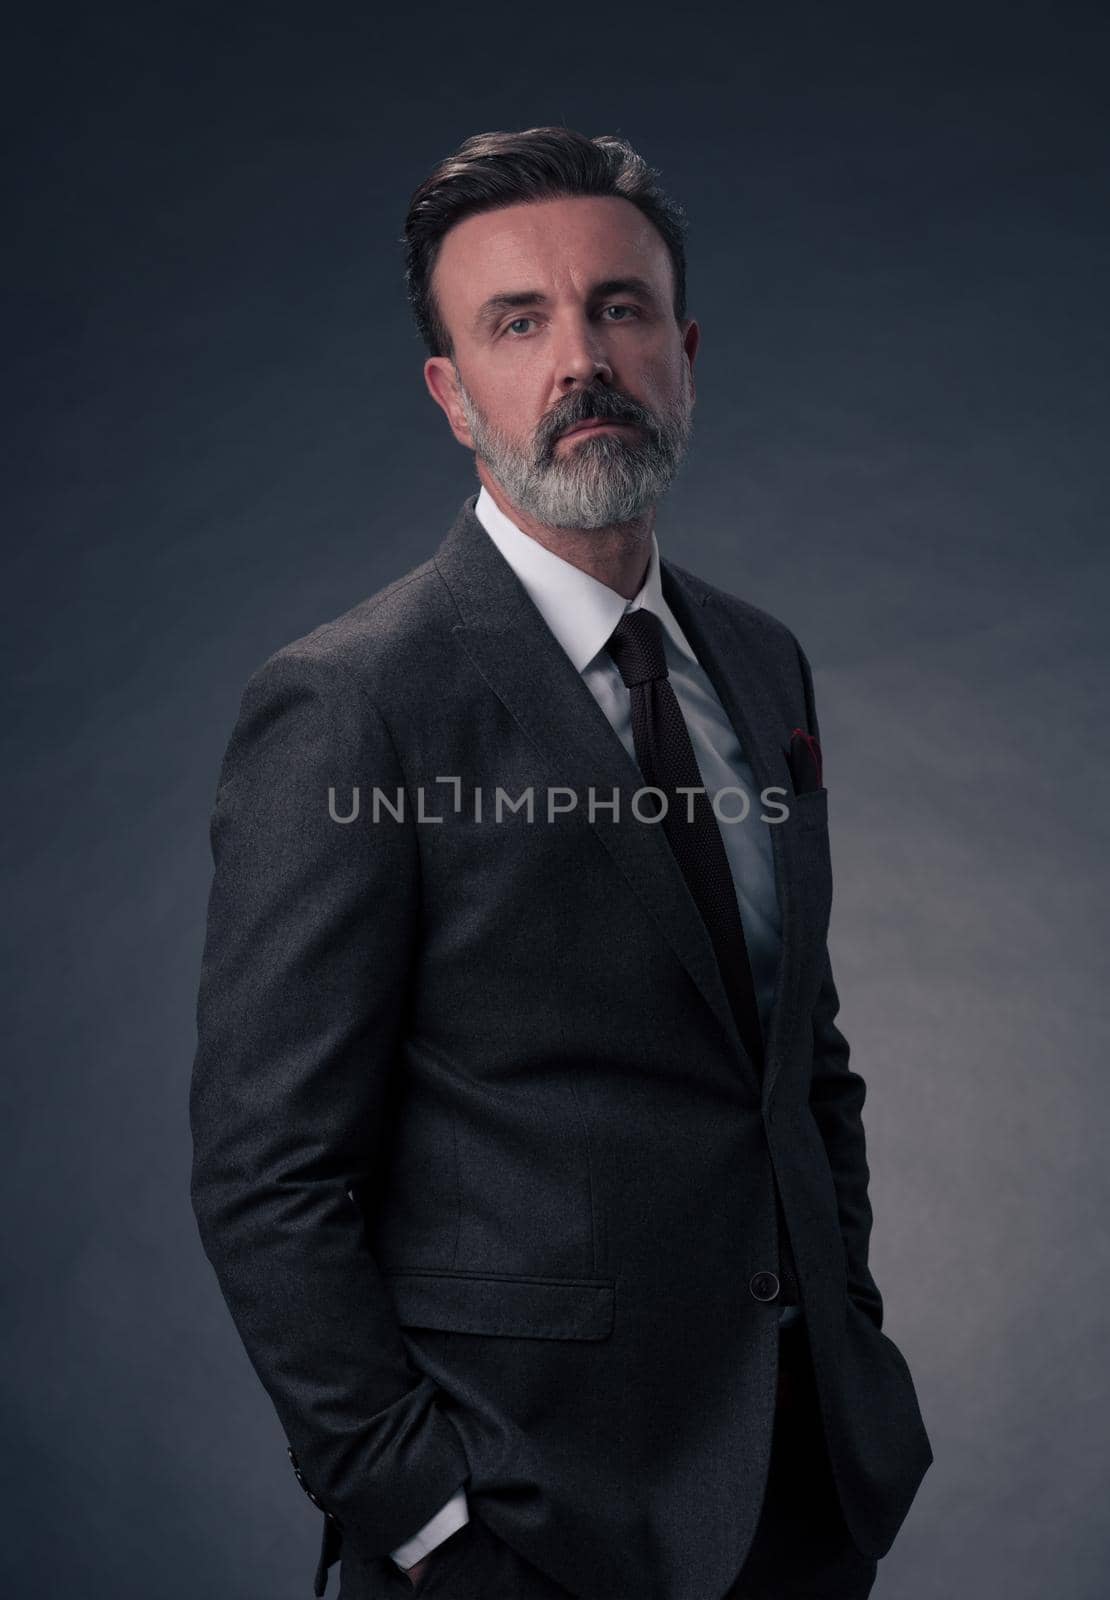 Portrait of a successful stylish elegant senior businessman with a grey beard and casual business clothes confident in photo studio isolated on dark background gesturing with hands. High-quality photo